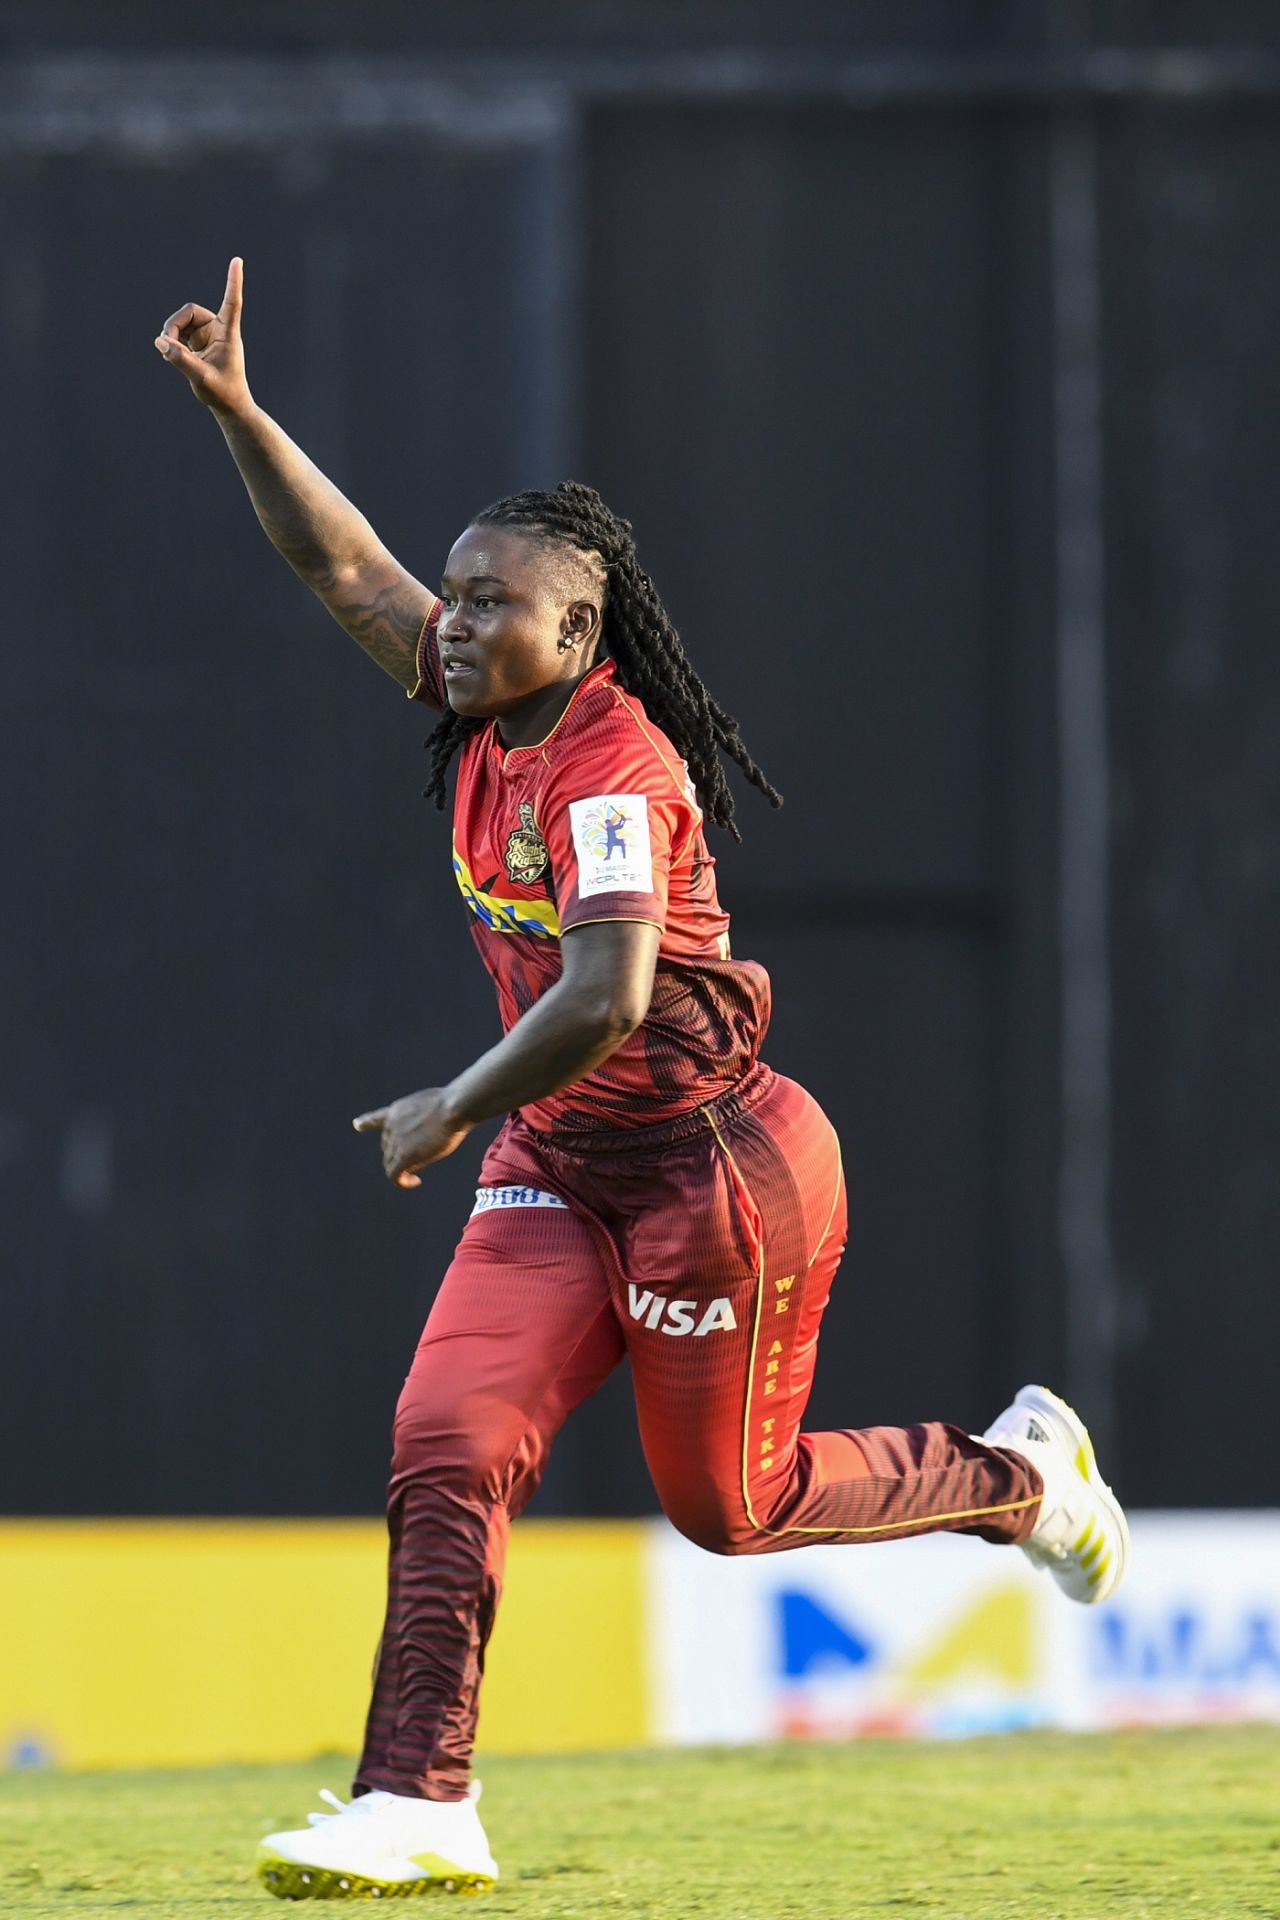 That Deandra Dottin loves to bowl under pressure is an open secret; she celebrates after successfully defending ten in the last over, Trinbago Knight Riders vs Barbados Royals, WCPL 2022, Basseterre, August 31, 2022